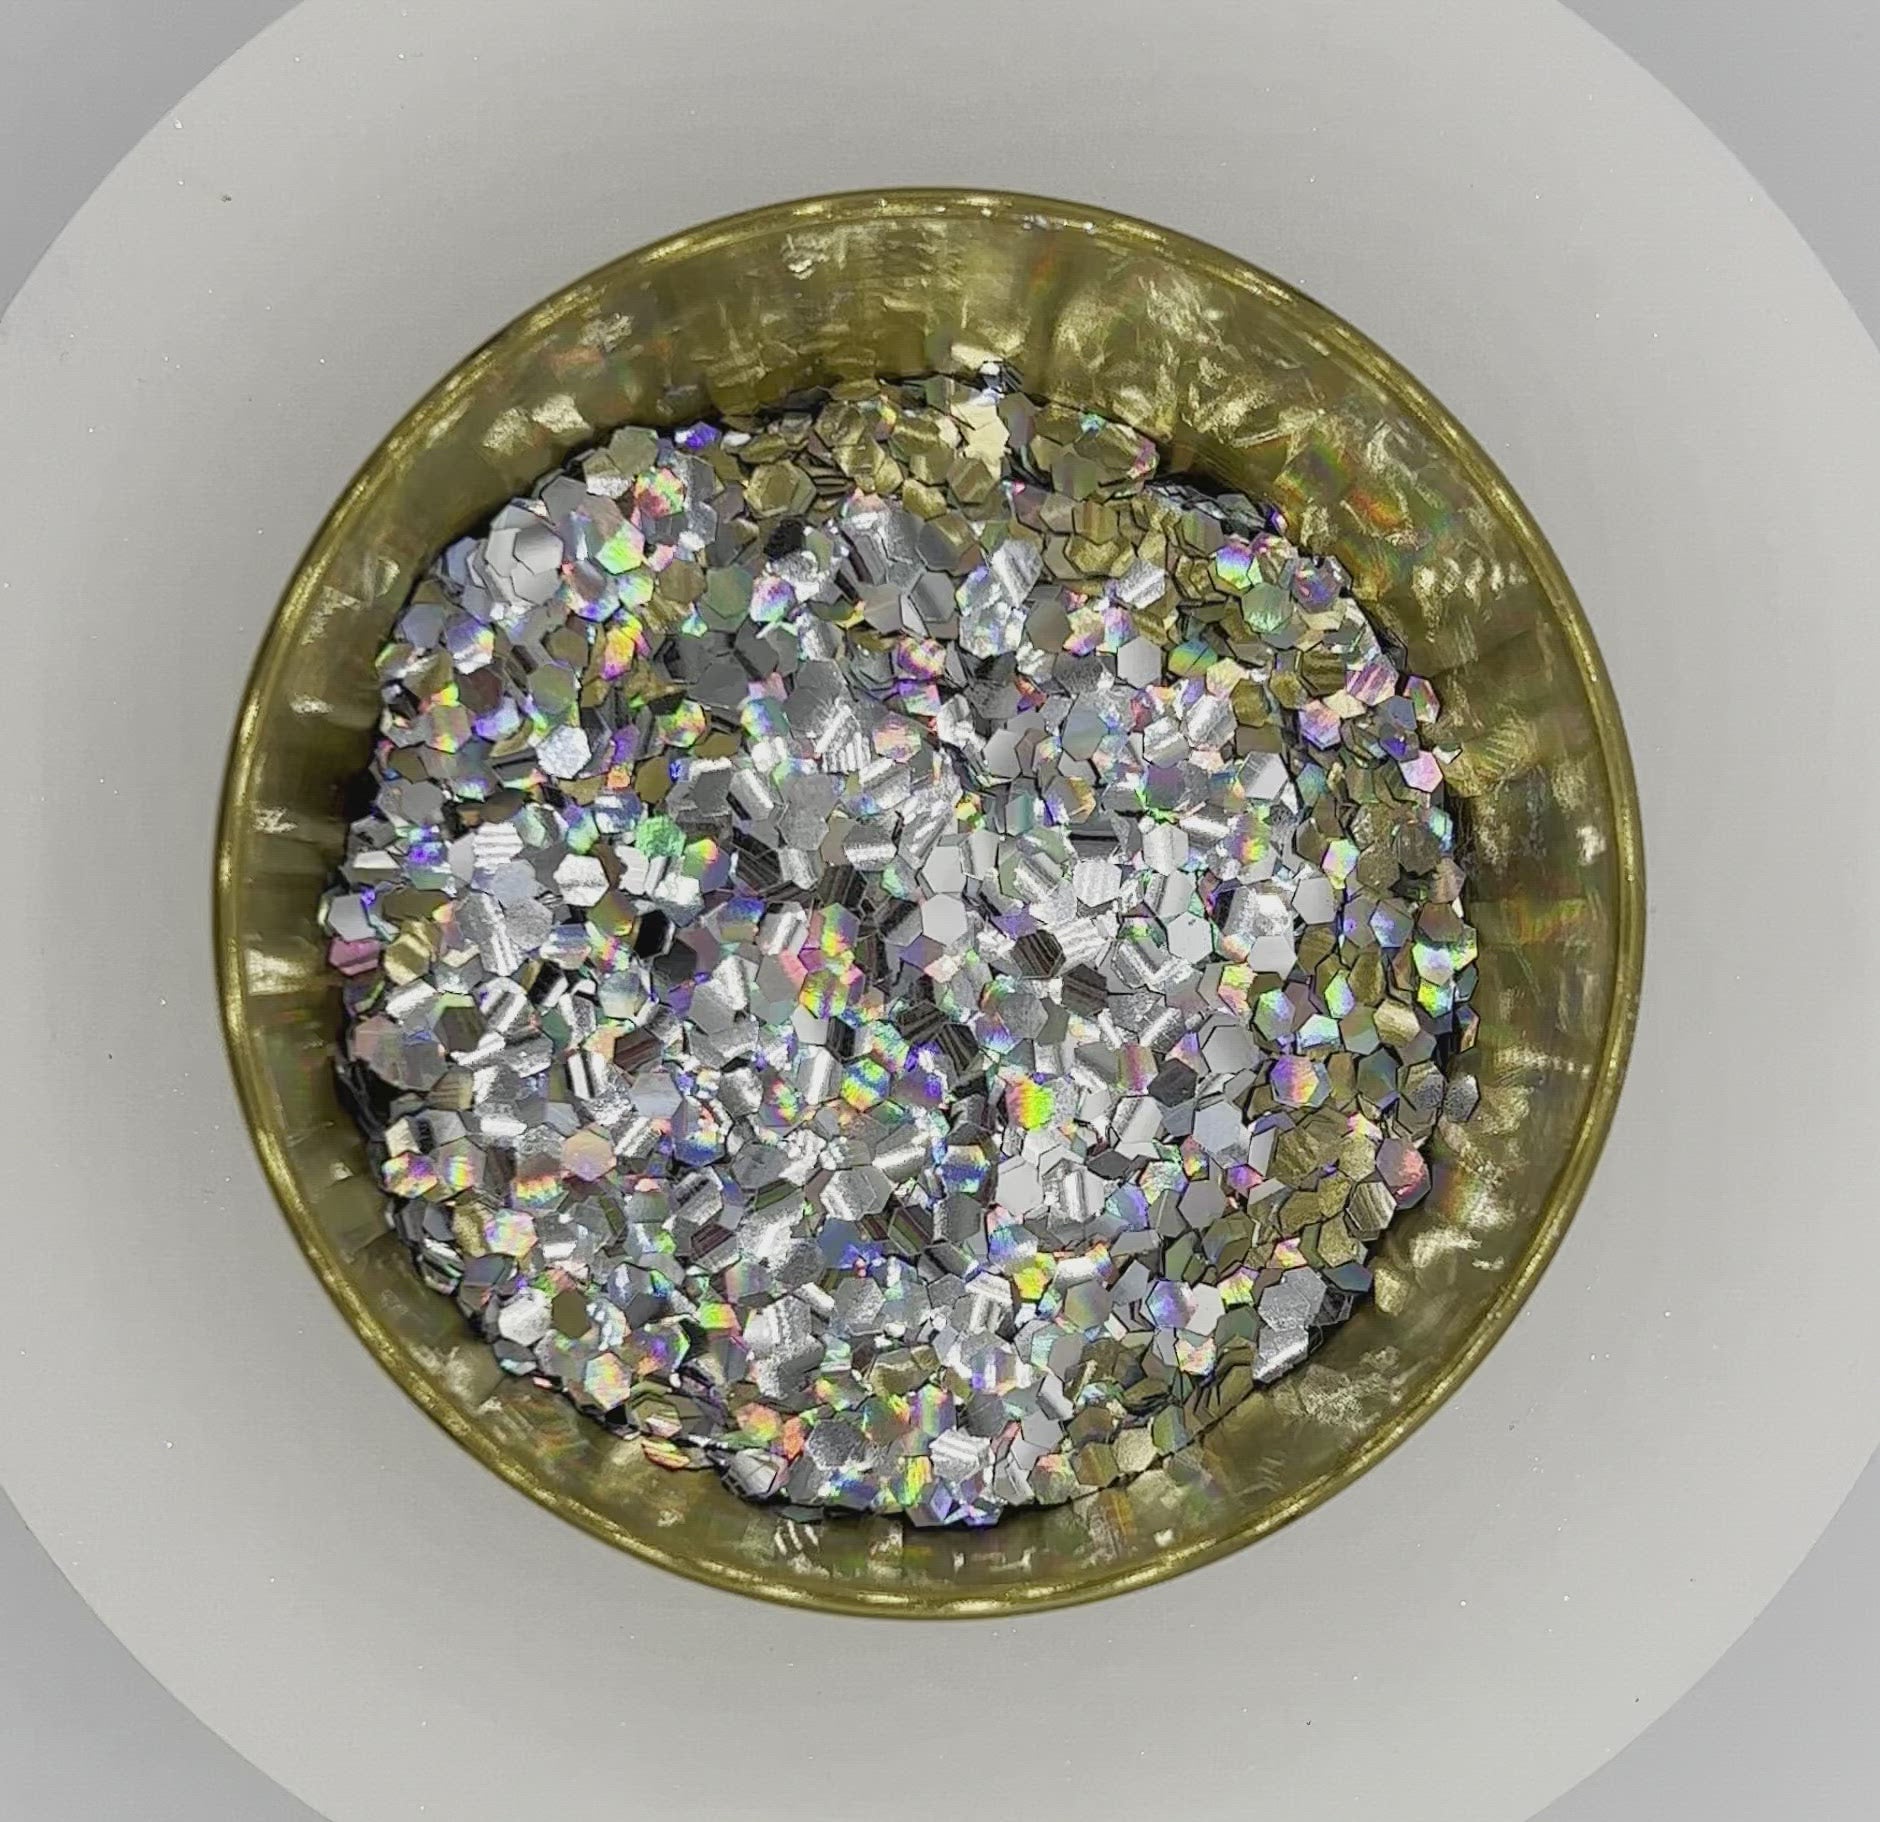 Eco Friendly Biodegradable Craft Glitter - Silver Holographic